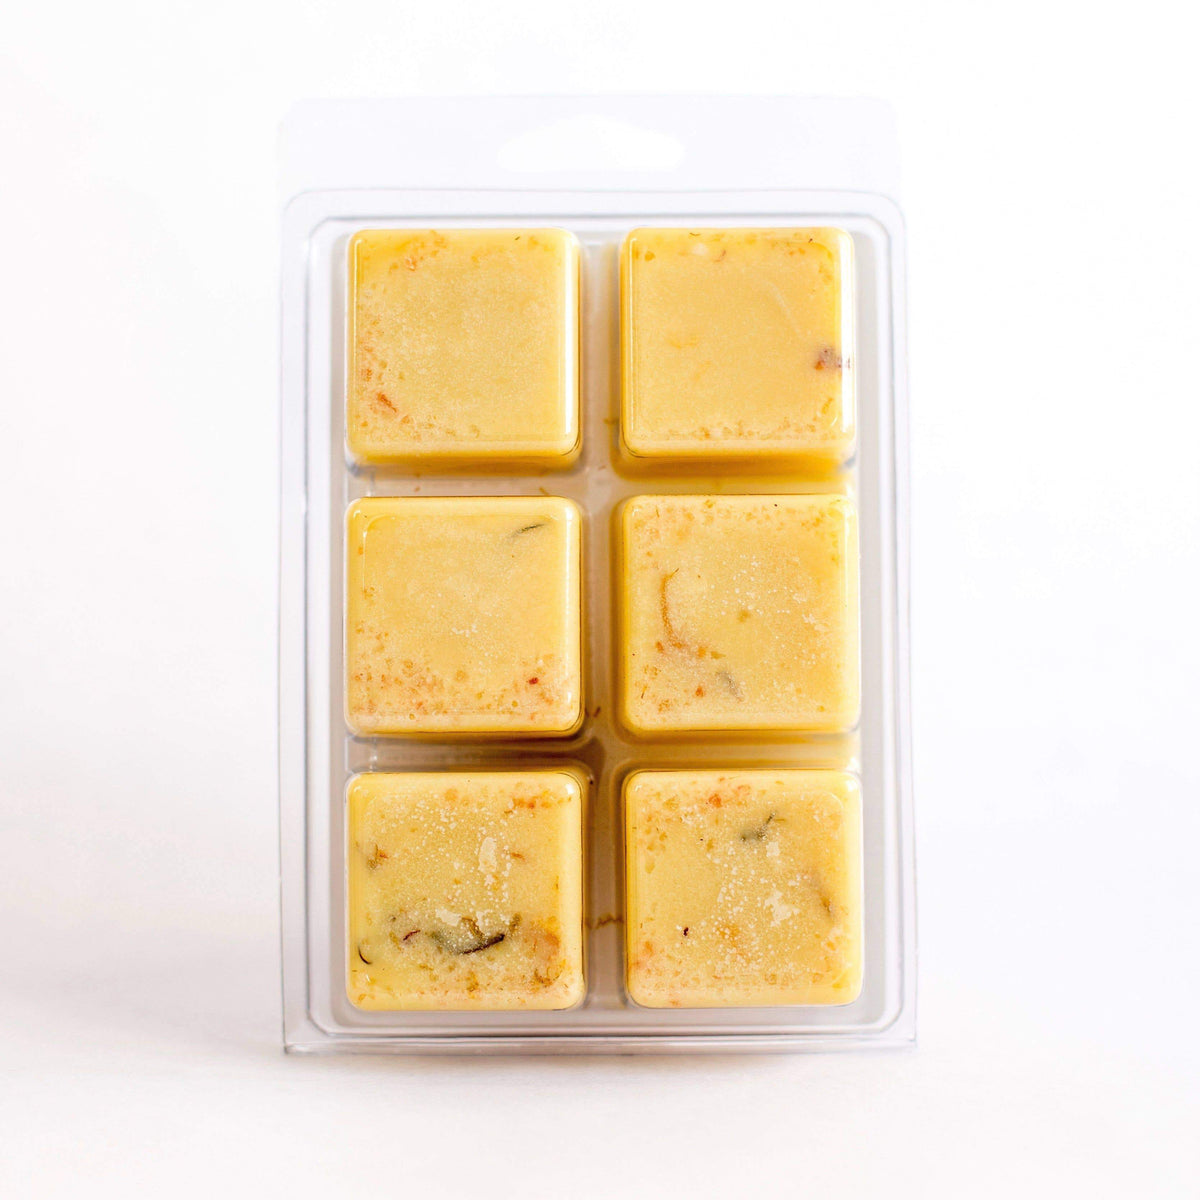 Six squares of frozen SOAK Bath Co. Cocoa Butter Bath Melt desserts infused with sweet almond oil in a clear plastic package with a white background, each piece neatly arranged in two rows.